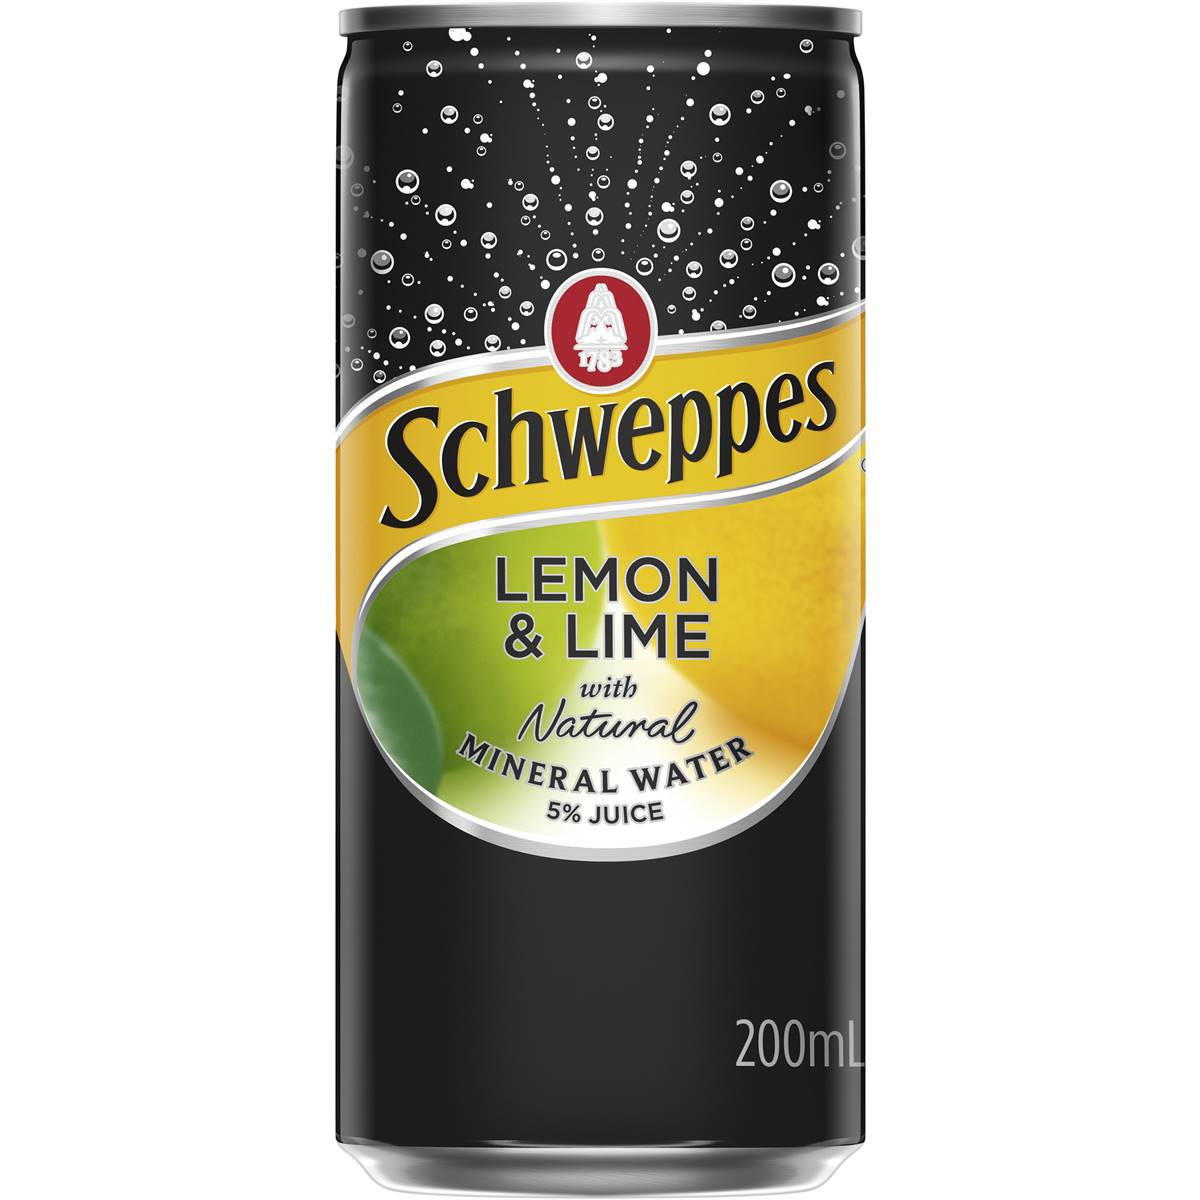 Calories in Schweppes Natural Mineral Water Lemon & Lime